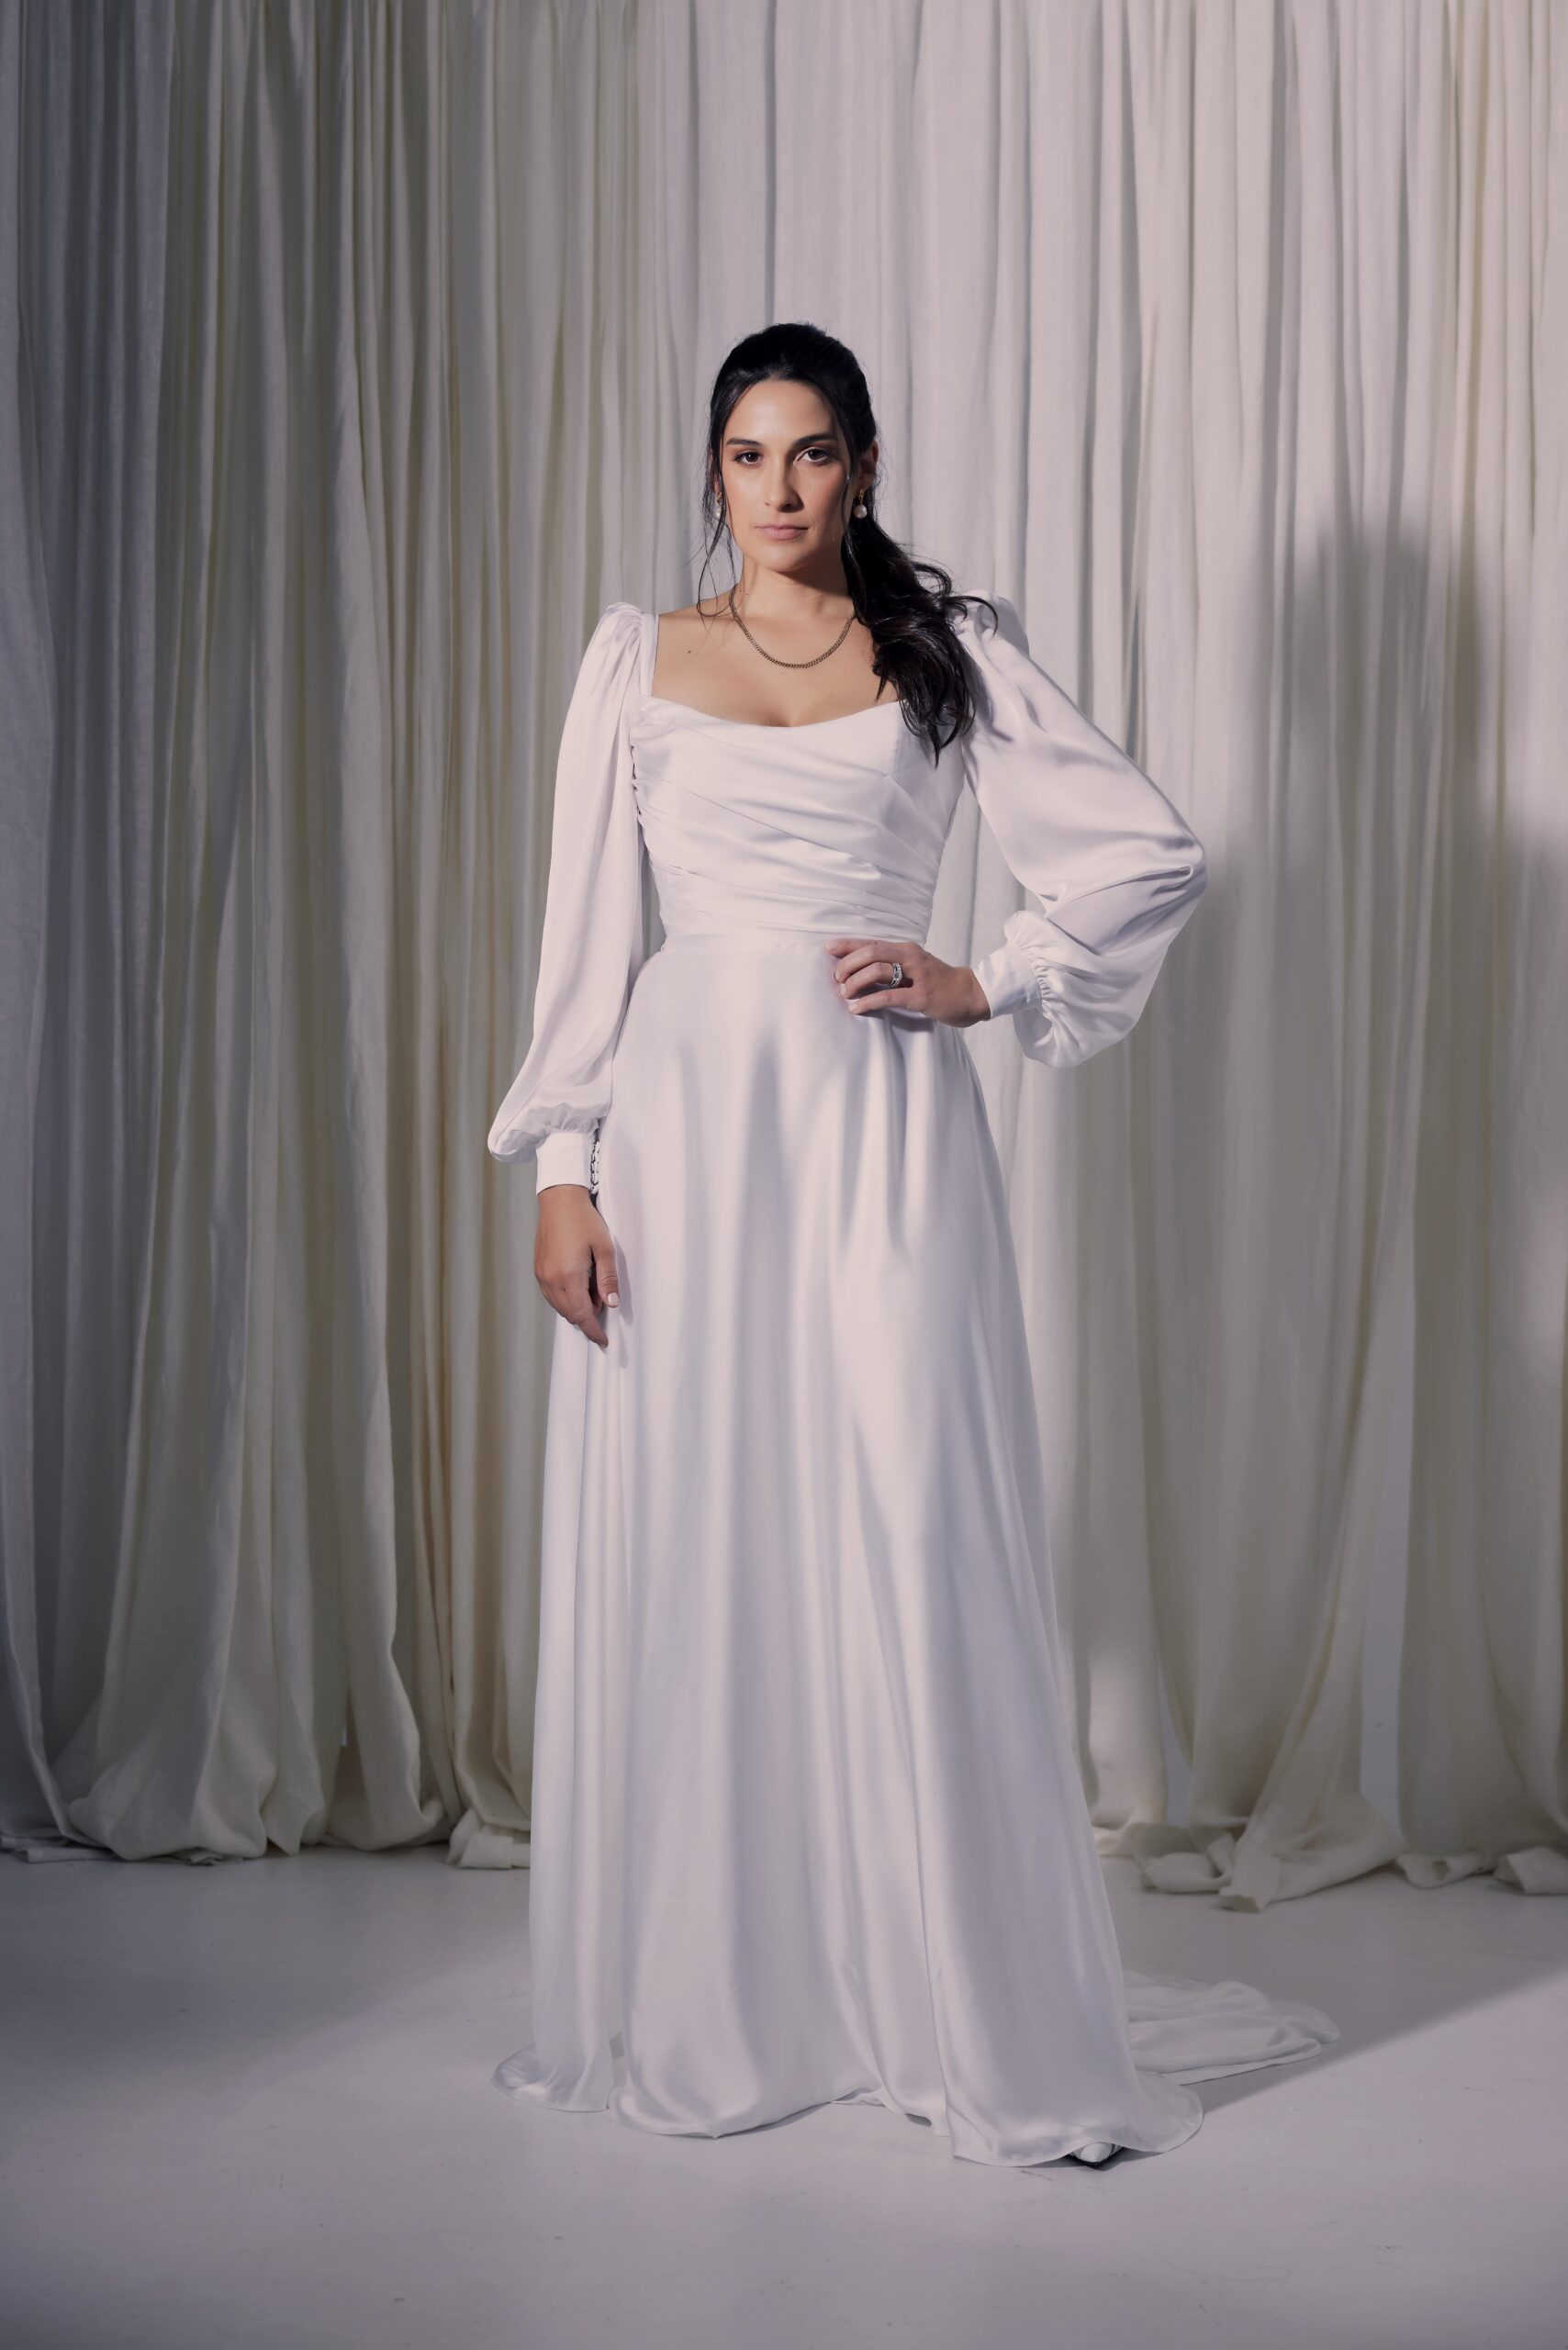 The Lunetta gown - recycled satin chiffon with a softly draped bodice, a-line skirt and bishop sleeves.